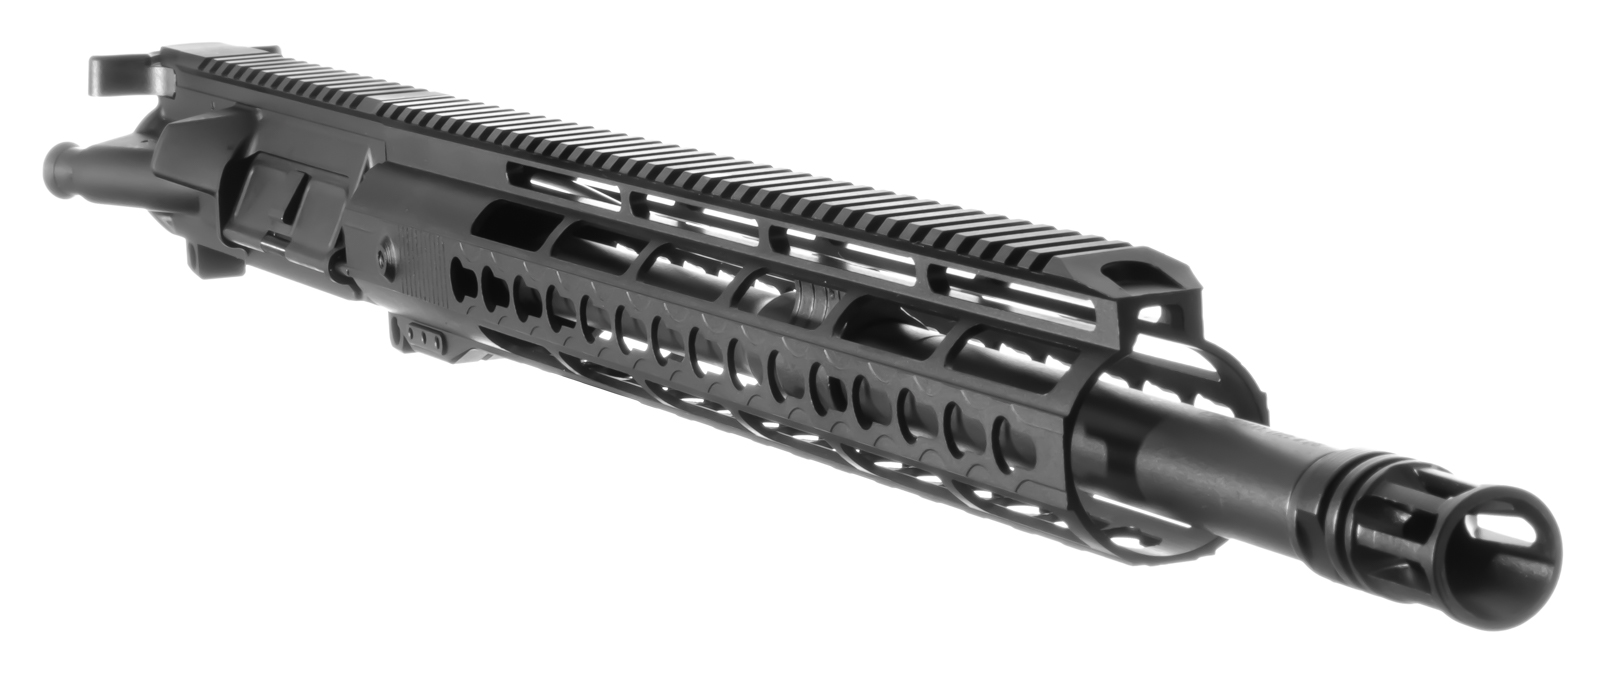 A2 Upper Receiver Assembly.